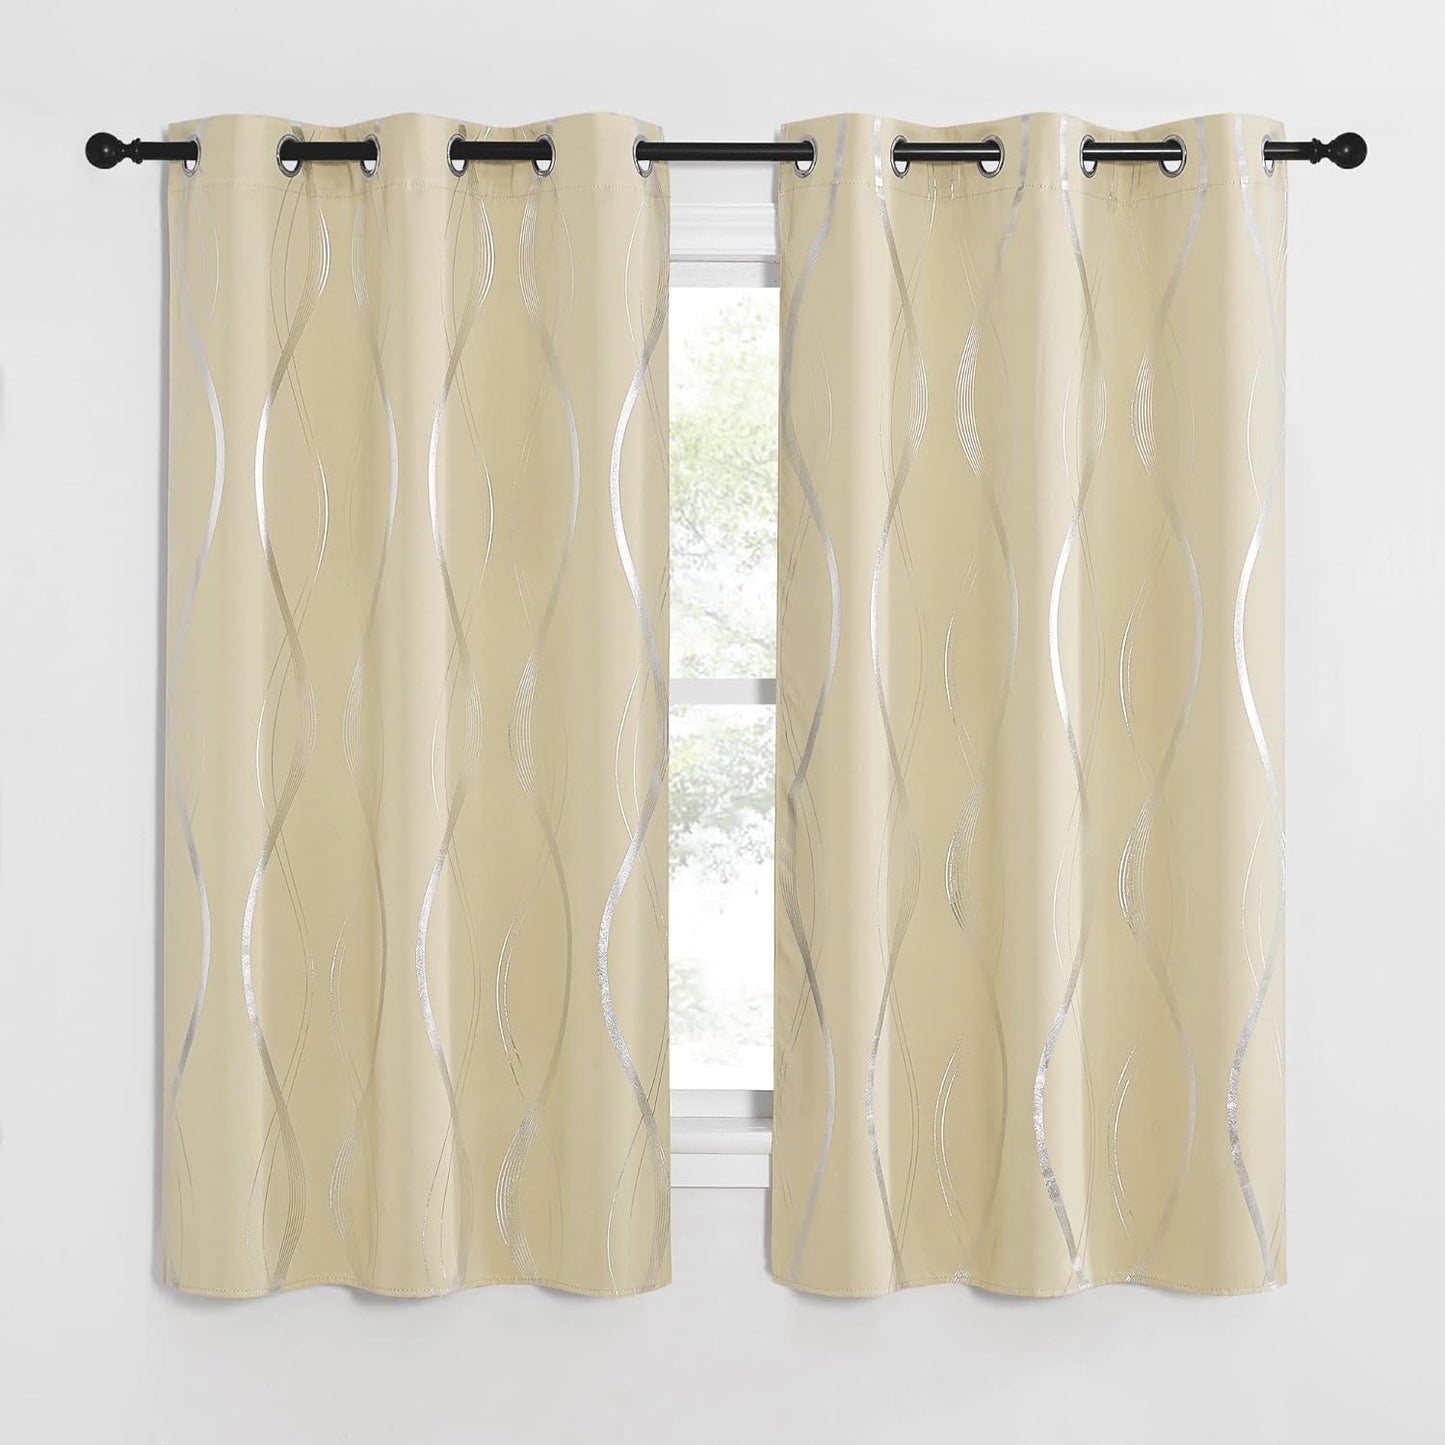 NICETOWN Grey Blackout Curtains 84 Inch Length 2 Panels Set for Bedroom/Living Room, Noise Reducing Thermal Insulated Wave Line Foil Print Drapes for Patio Sliding Glass Door (52 X 84, Gray)  NICETOWN Biscotti Beige 42"W X 63"L 